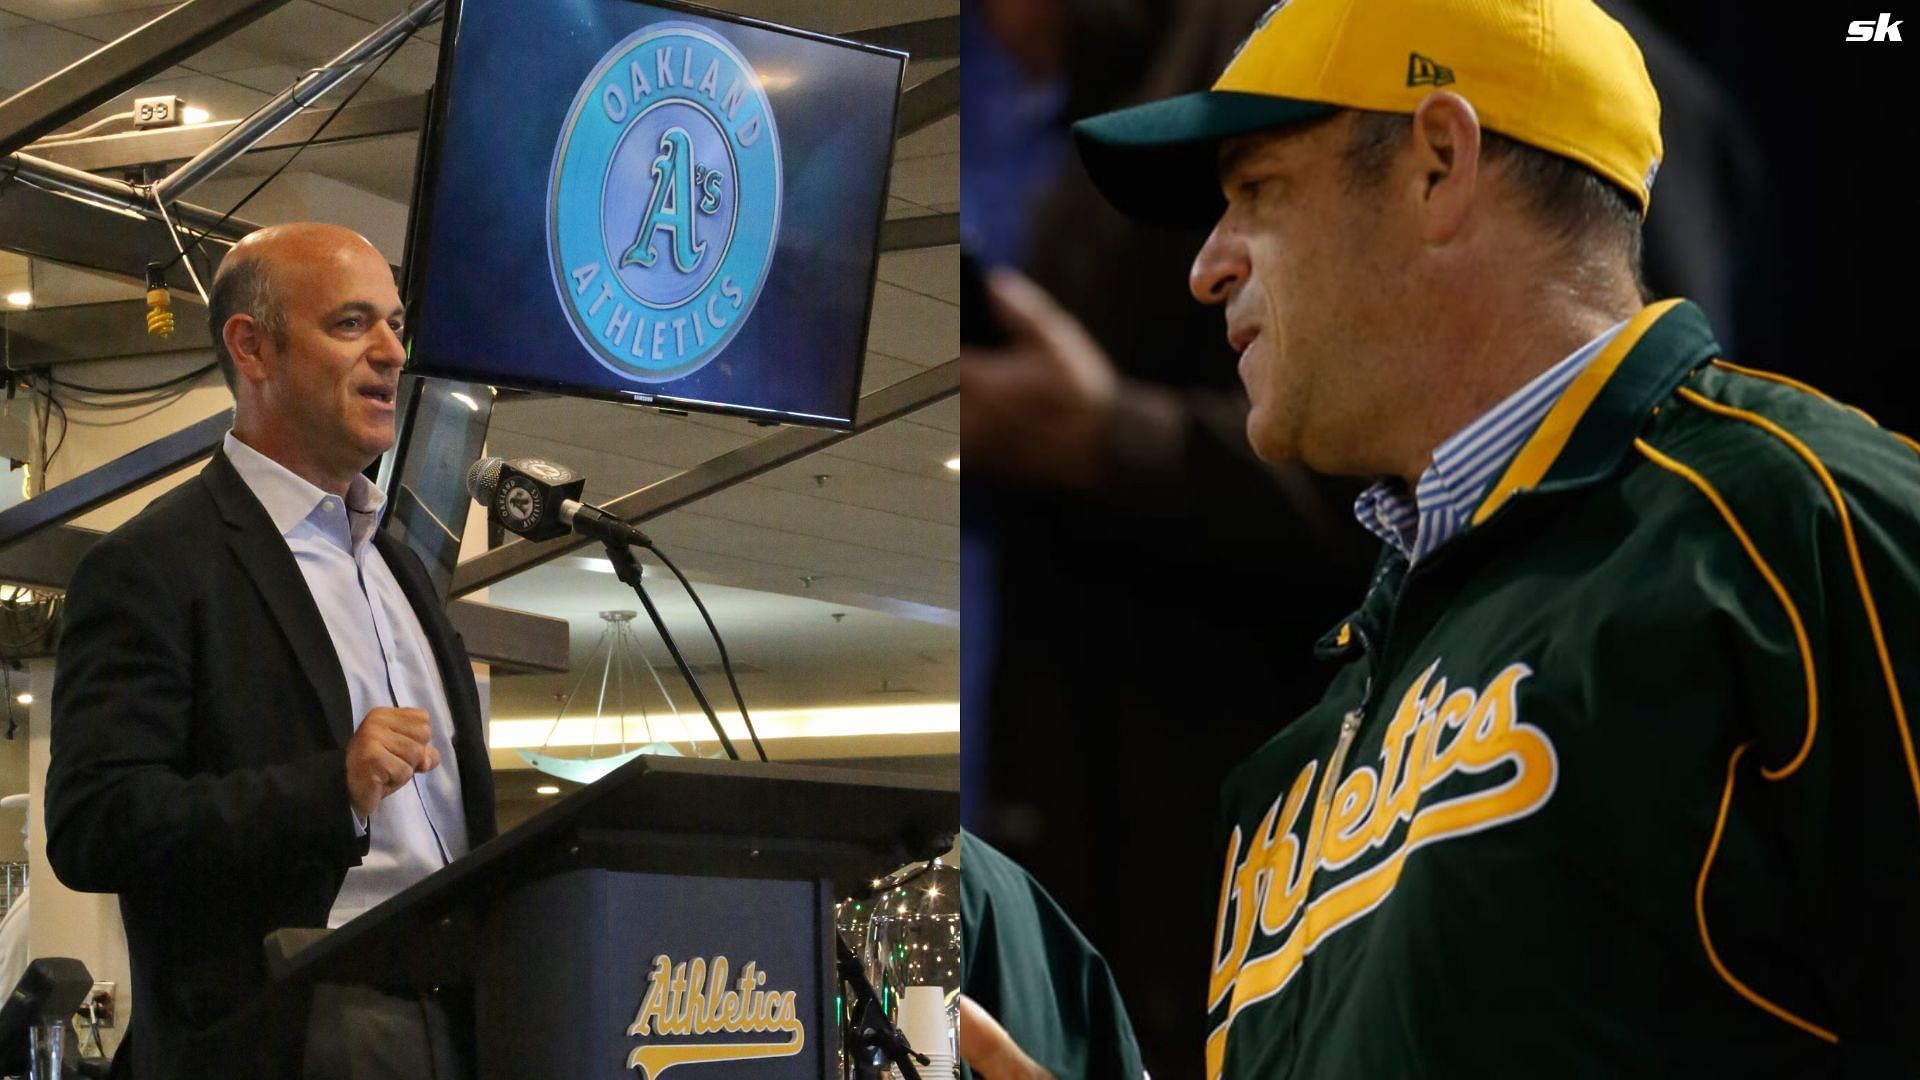 Ken Rosenthal believes all 30 team owners are responsible for the Athletics